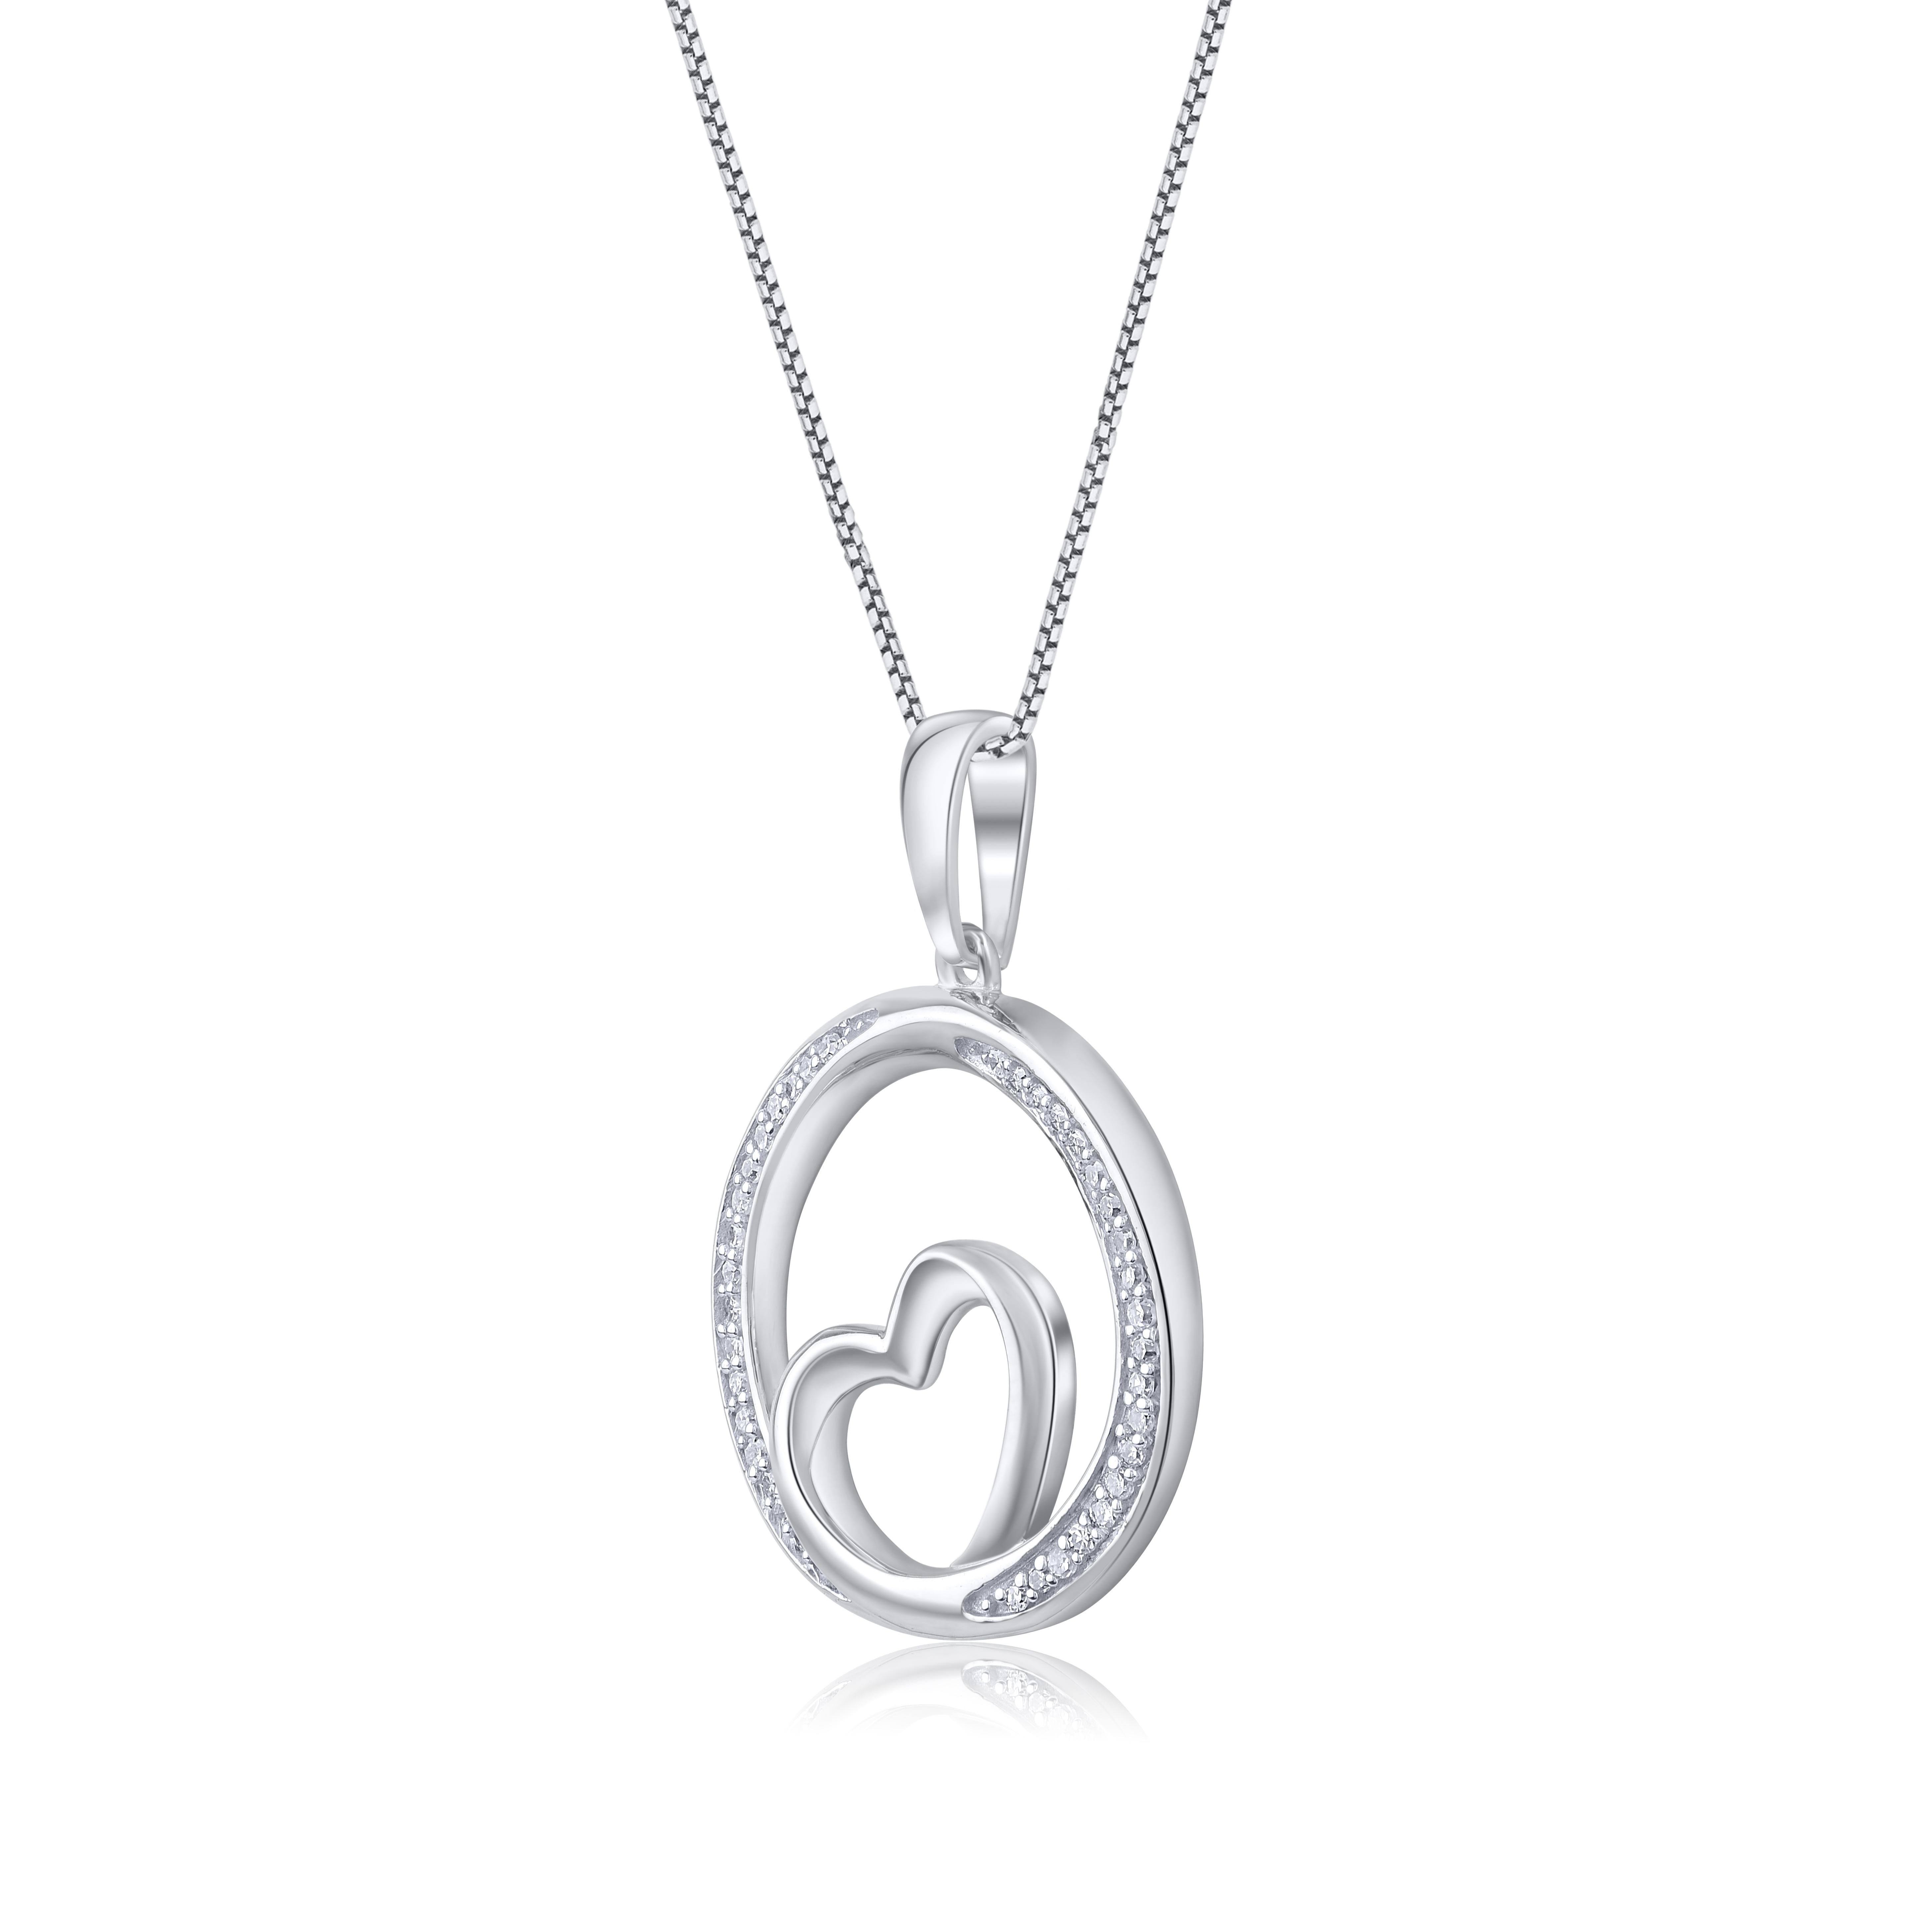 Show your love with this heart diamond pendant. This beautiful pendant necklace is studded with 38 single cut round diamonds in pave setting. The total diamond weight of these pendant is 0.10 carats. All the diamonds are H-I color, I2 clarity. This